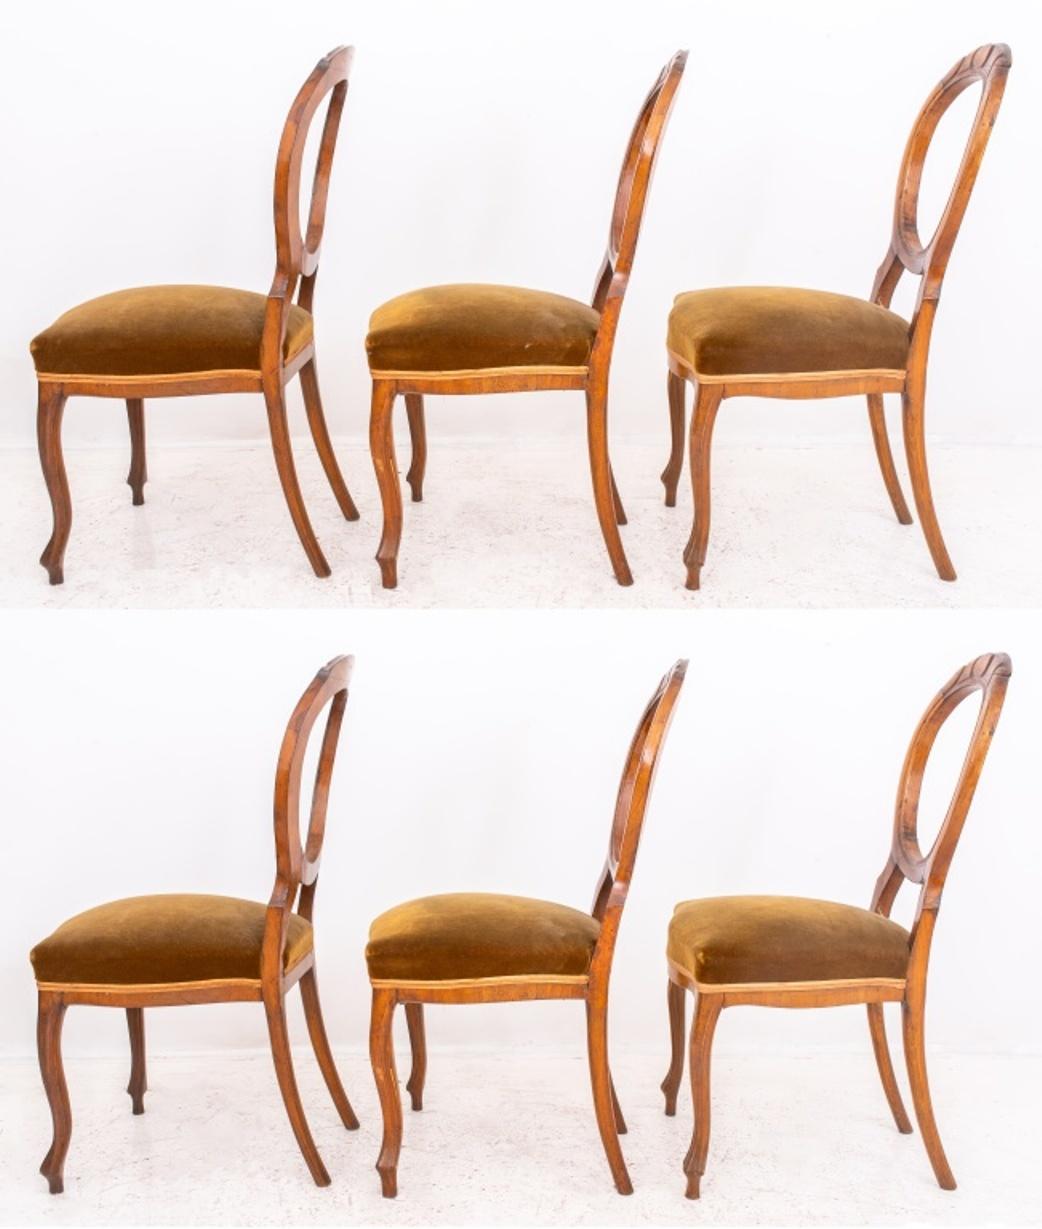 Late Victorian English Victorian Cherrywood Chair 19th Century, Set of 6